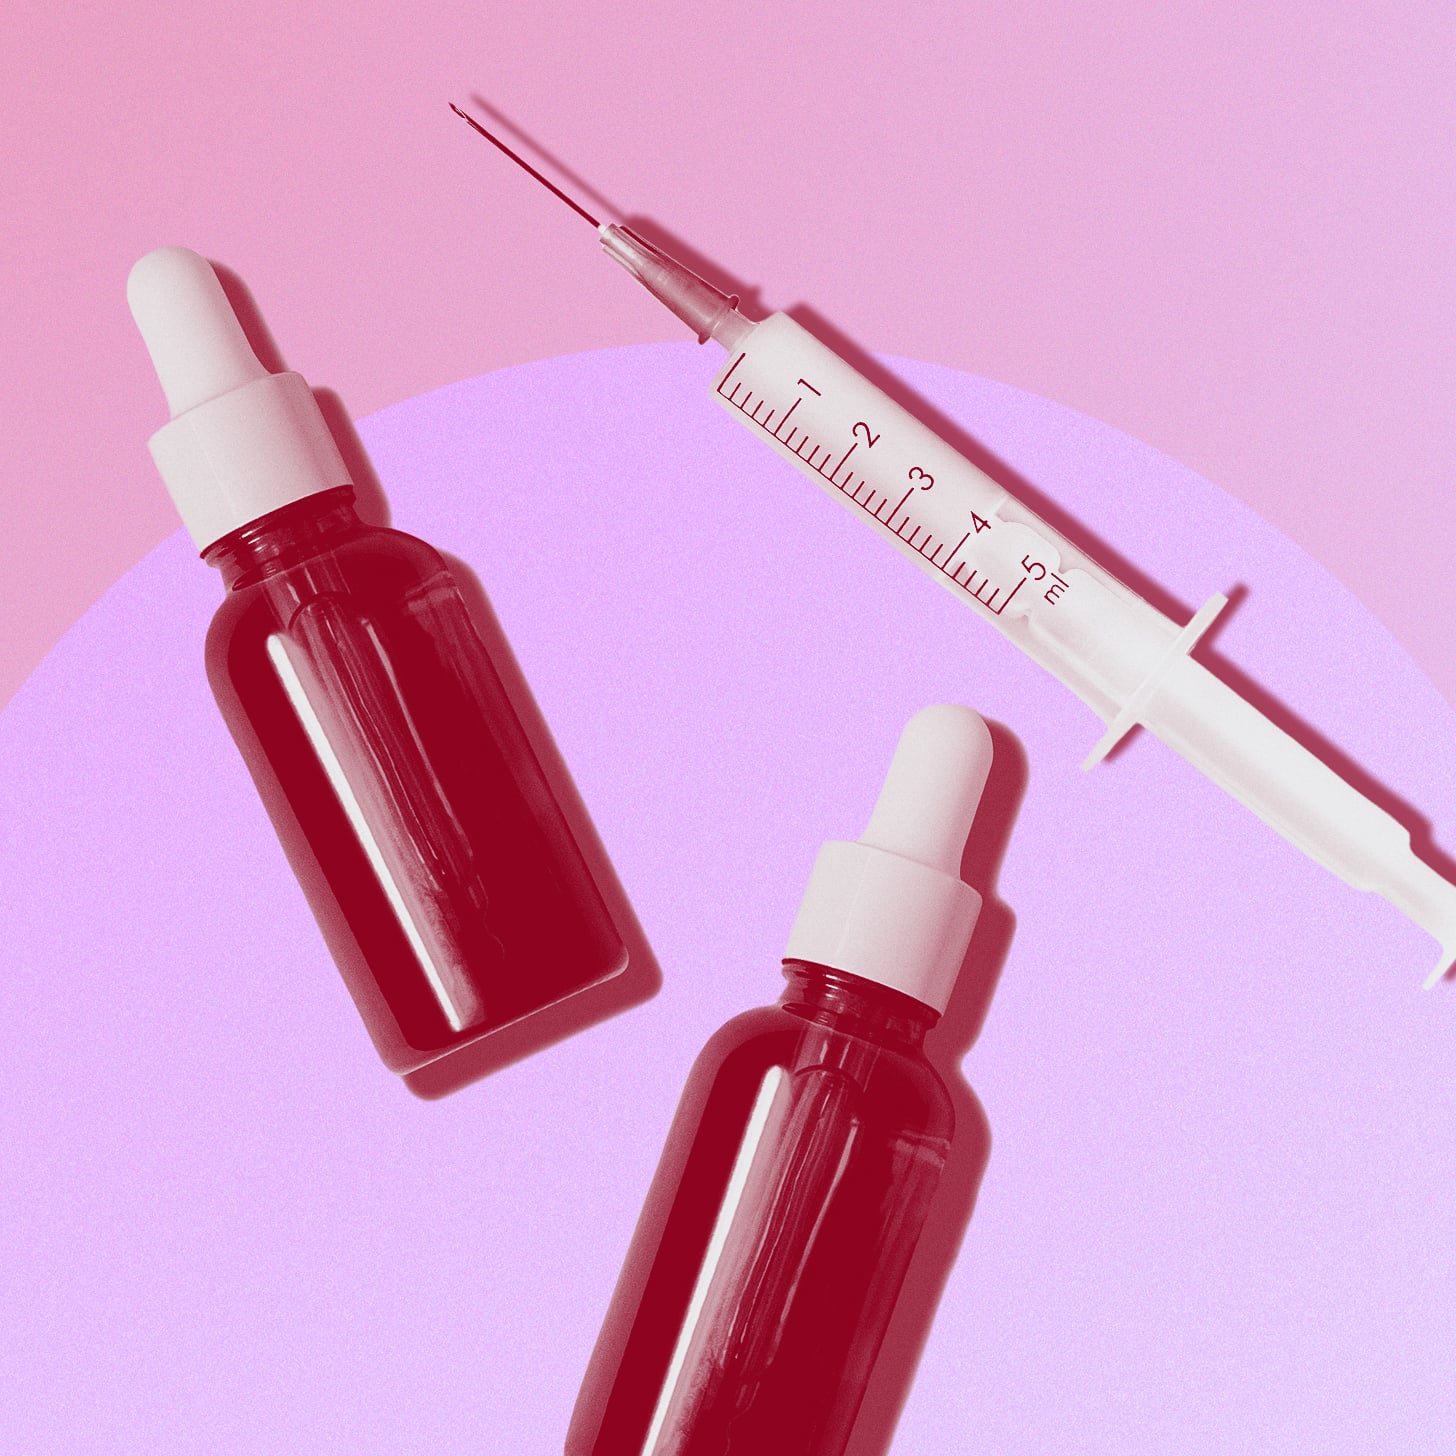 Can skin filler serums replace injectables